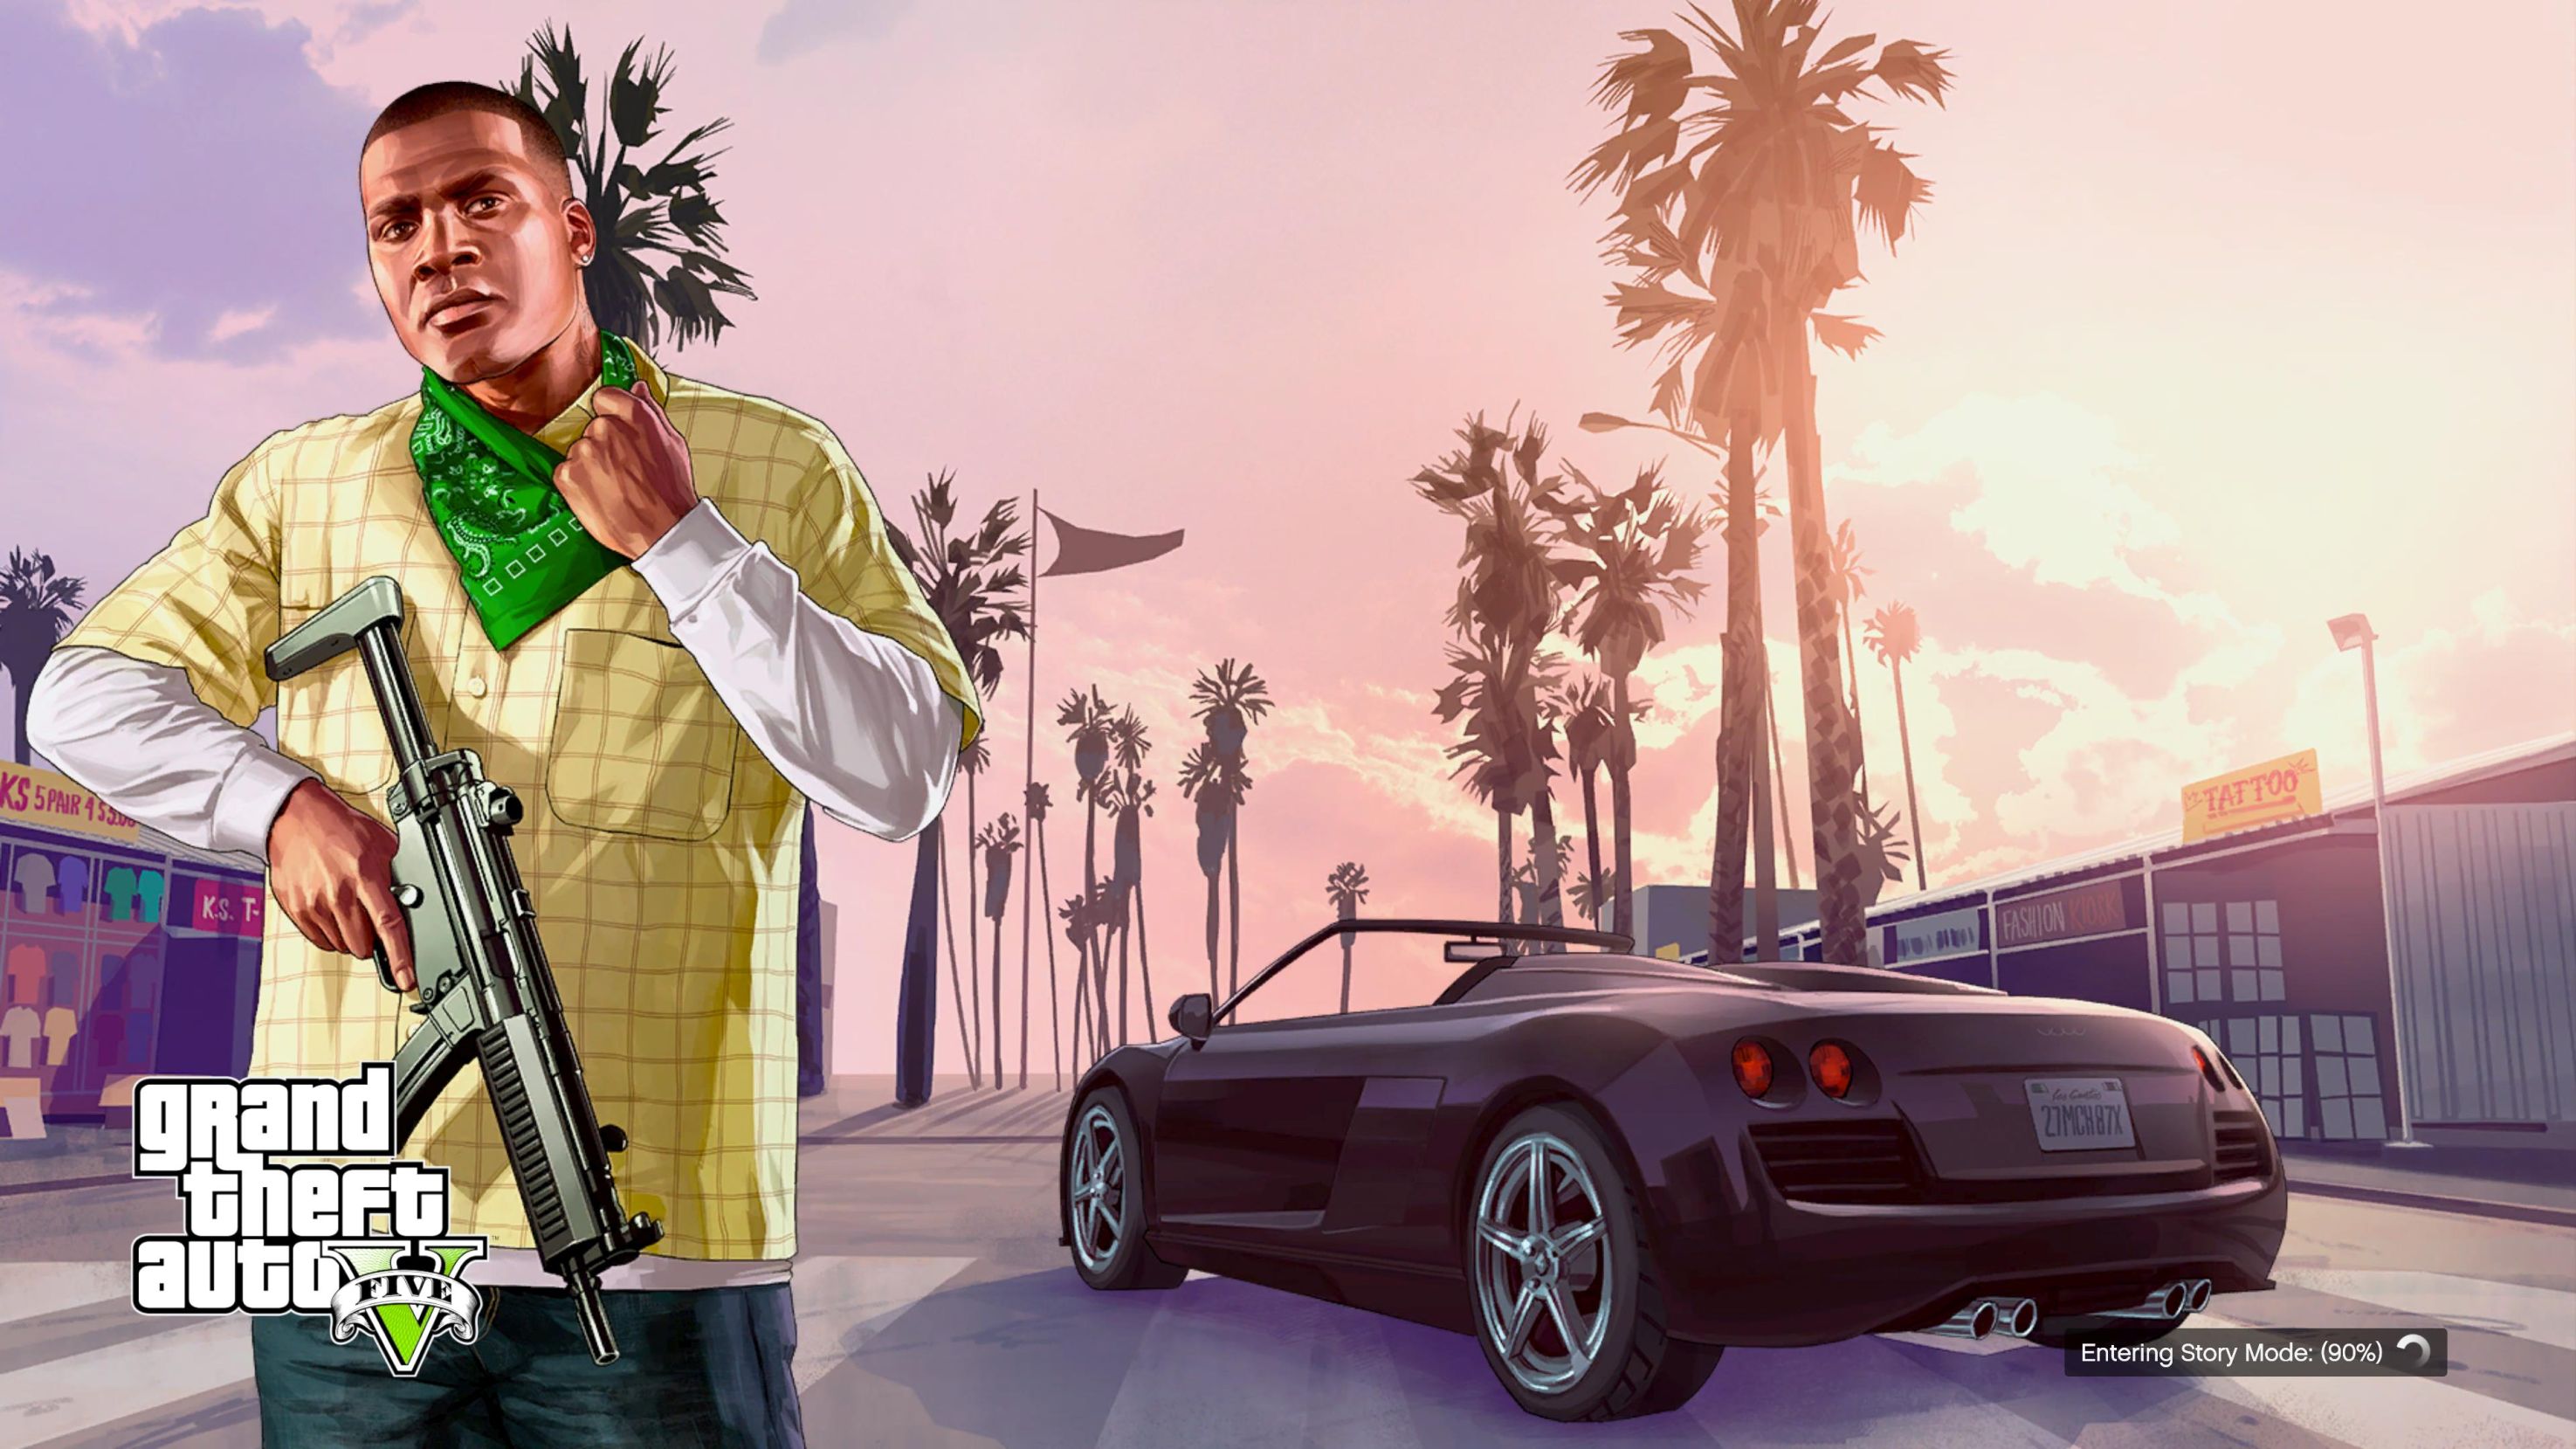 SKizzle⭐️ on X: NEW GTA 6 Leaks Just Dropped 😬 ✓ New Heist System ✓ Leaked  Images ✓ Release Date set for 2024 / 2025 ✓ Most immersive Rockstar game  And More